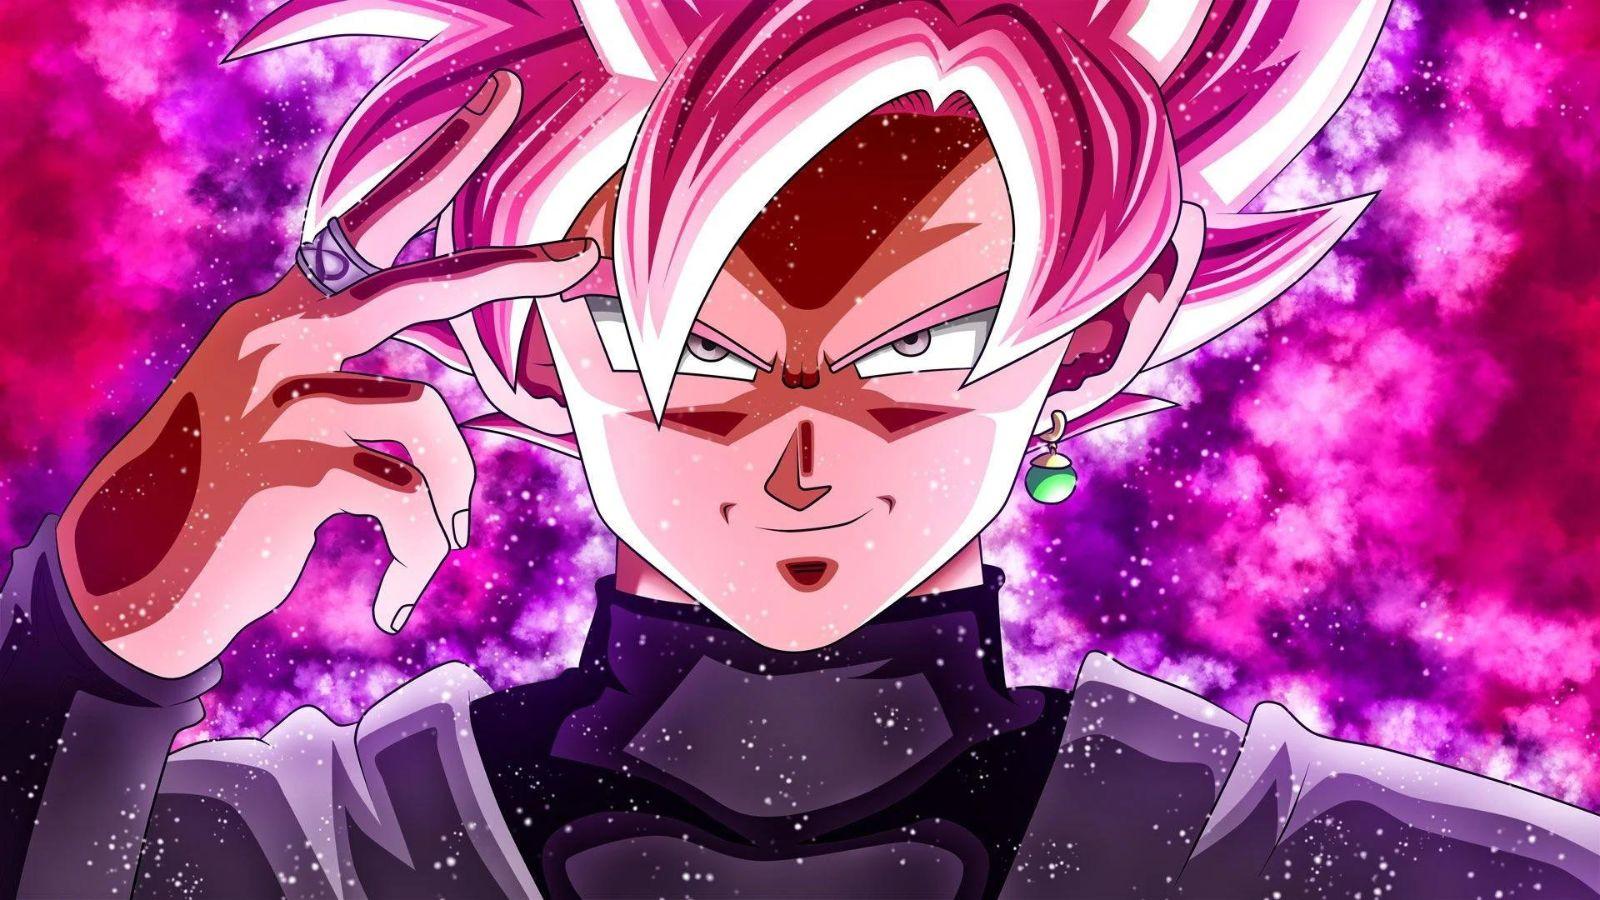 When is Goku Black coming to Fortnite? Everything we know about